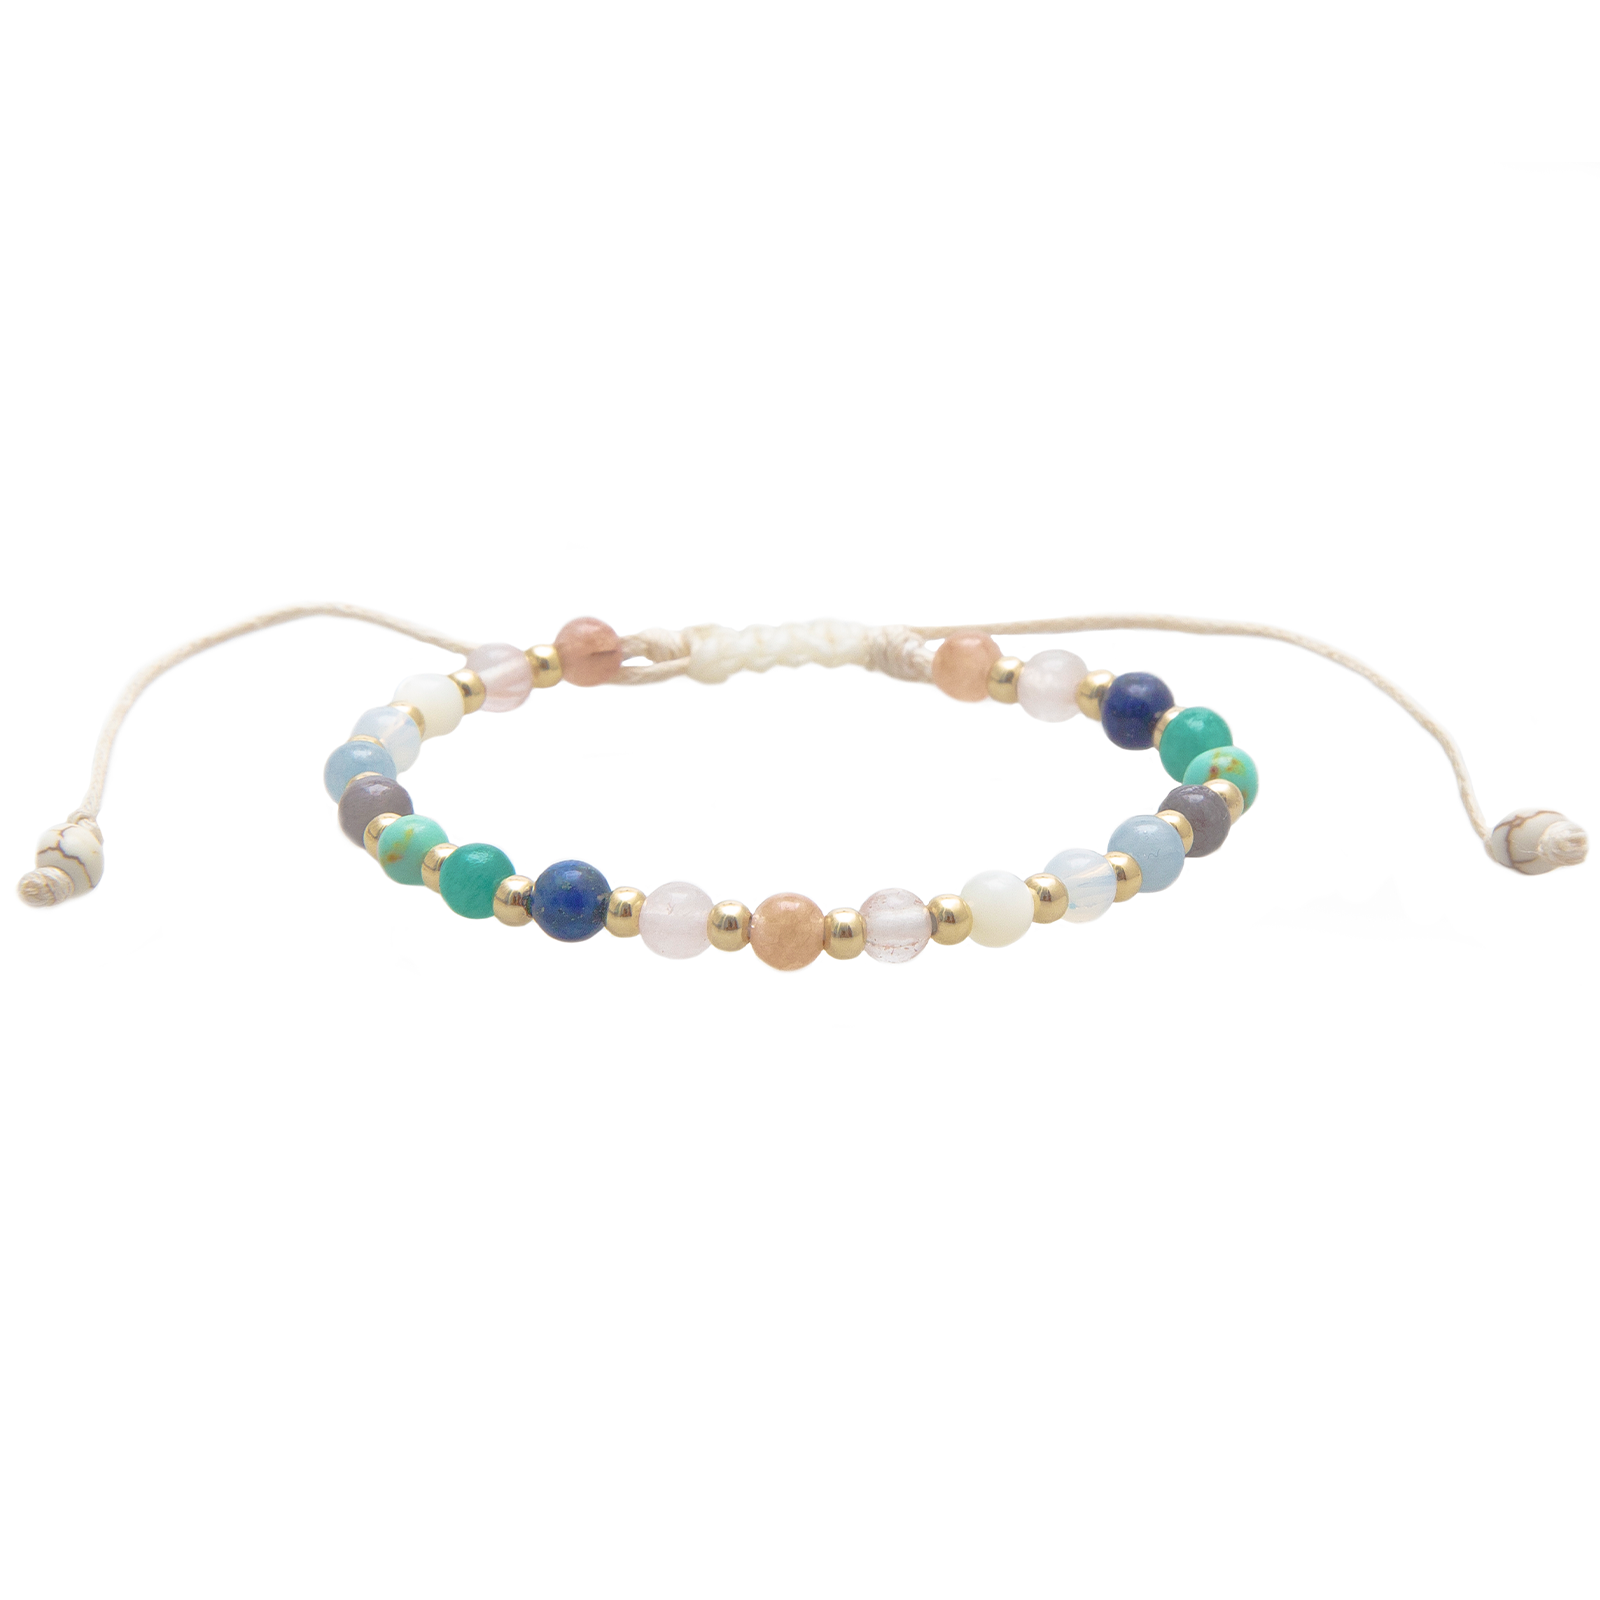 4mm multicolor stone and gold bead healing bracelet with a white cotton pull through closure